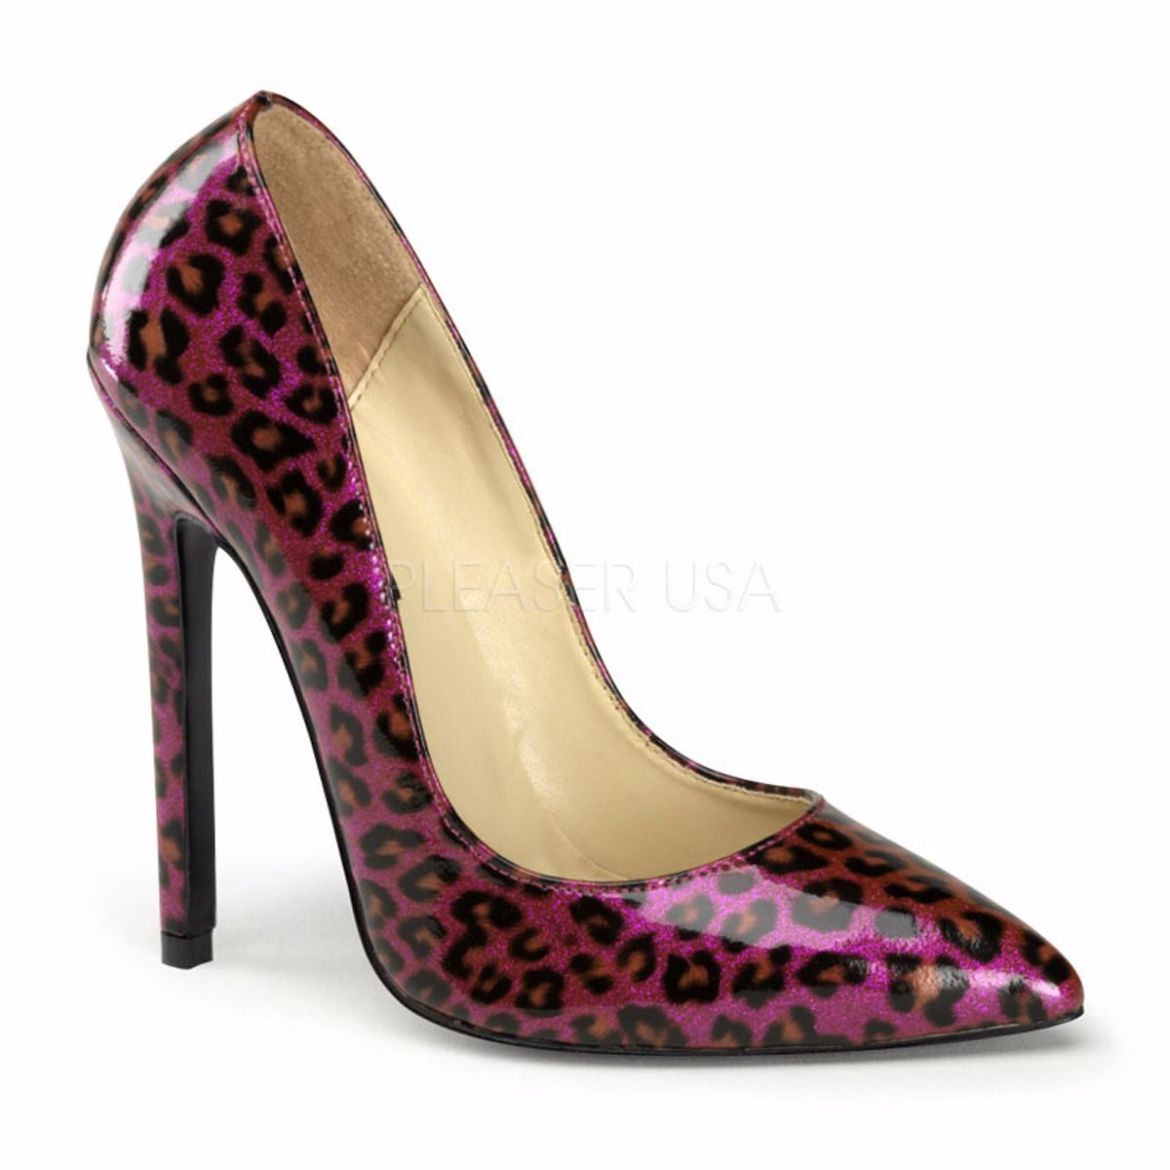 Product image of Pleaser Sexy-20 Purple Pearlized Patent, 5 inch (12.7 cm) Heel Court Pump Shoes